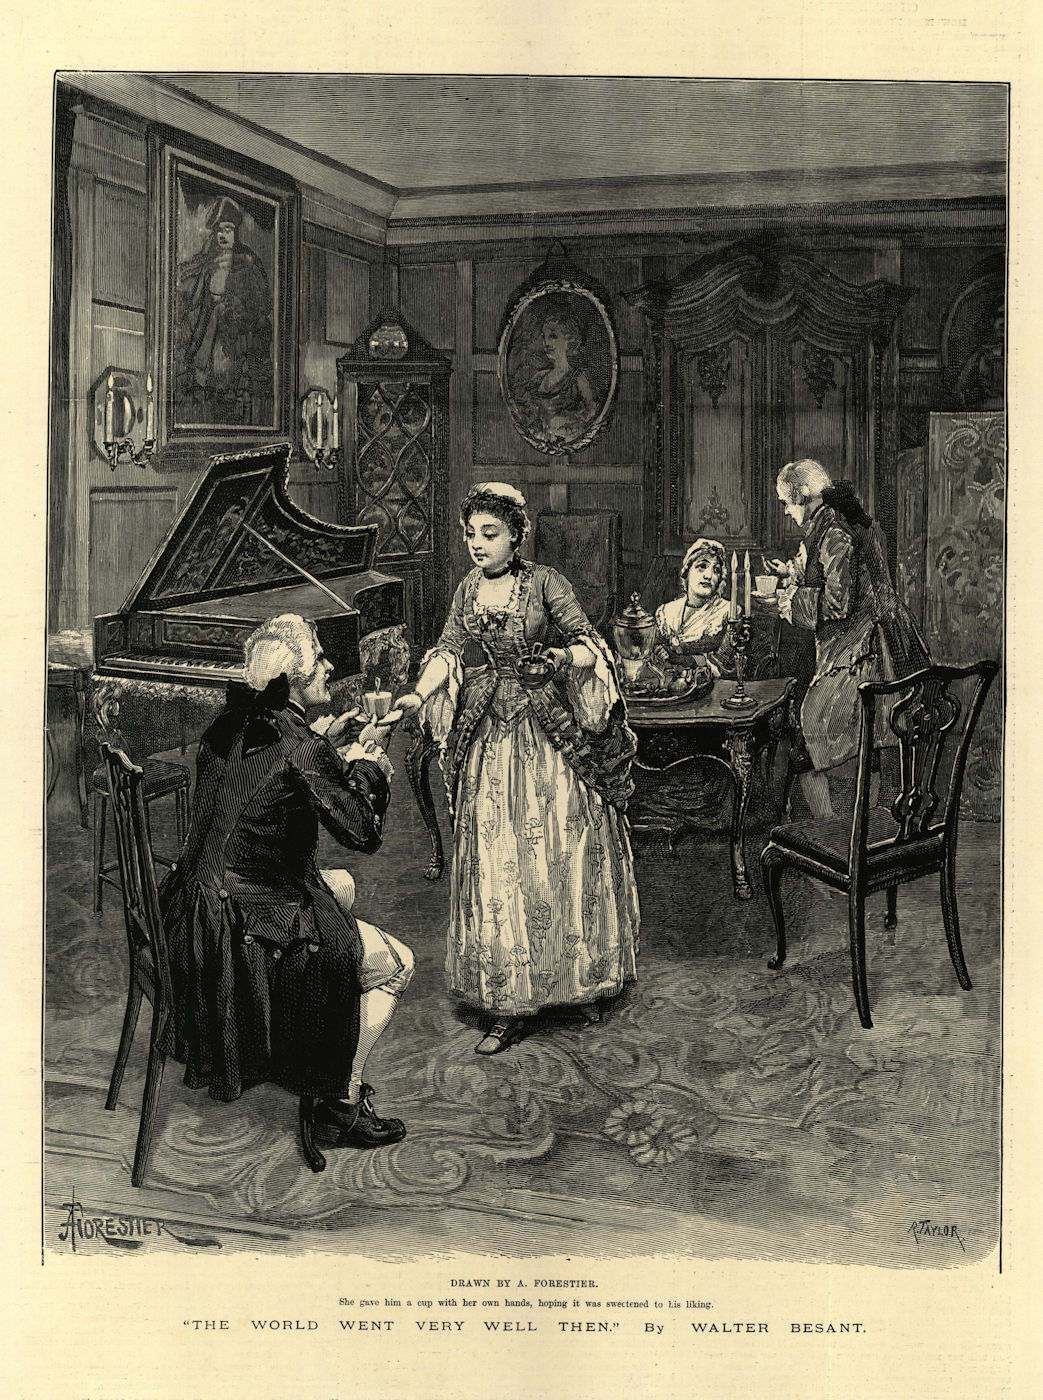 The World went very well then, by Walter Besant. Grand piano. 1886 old print